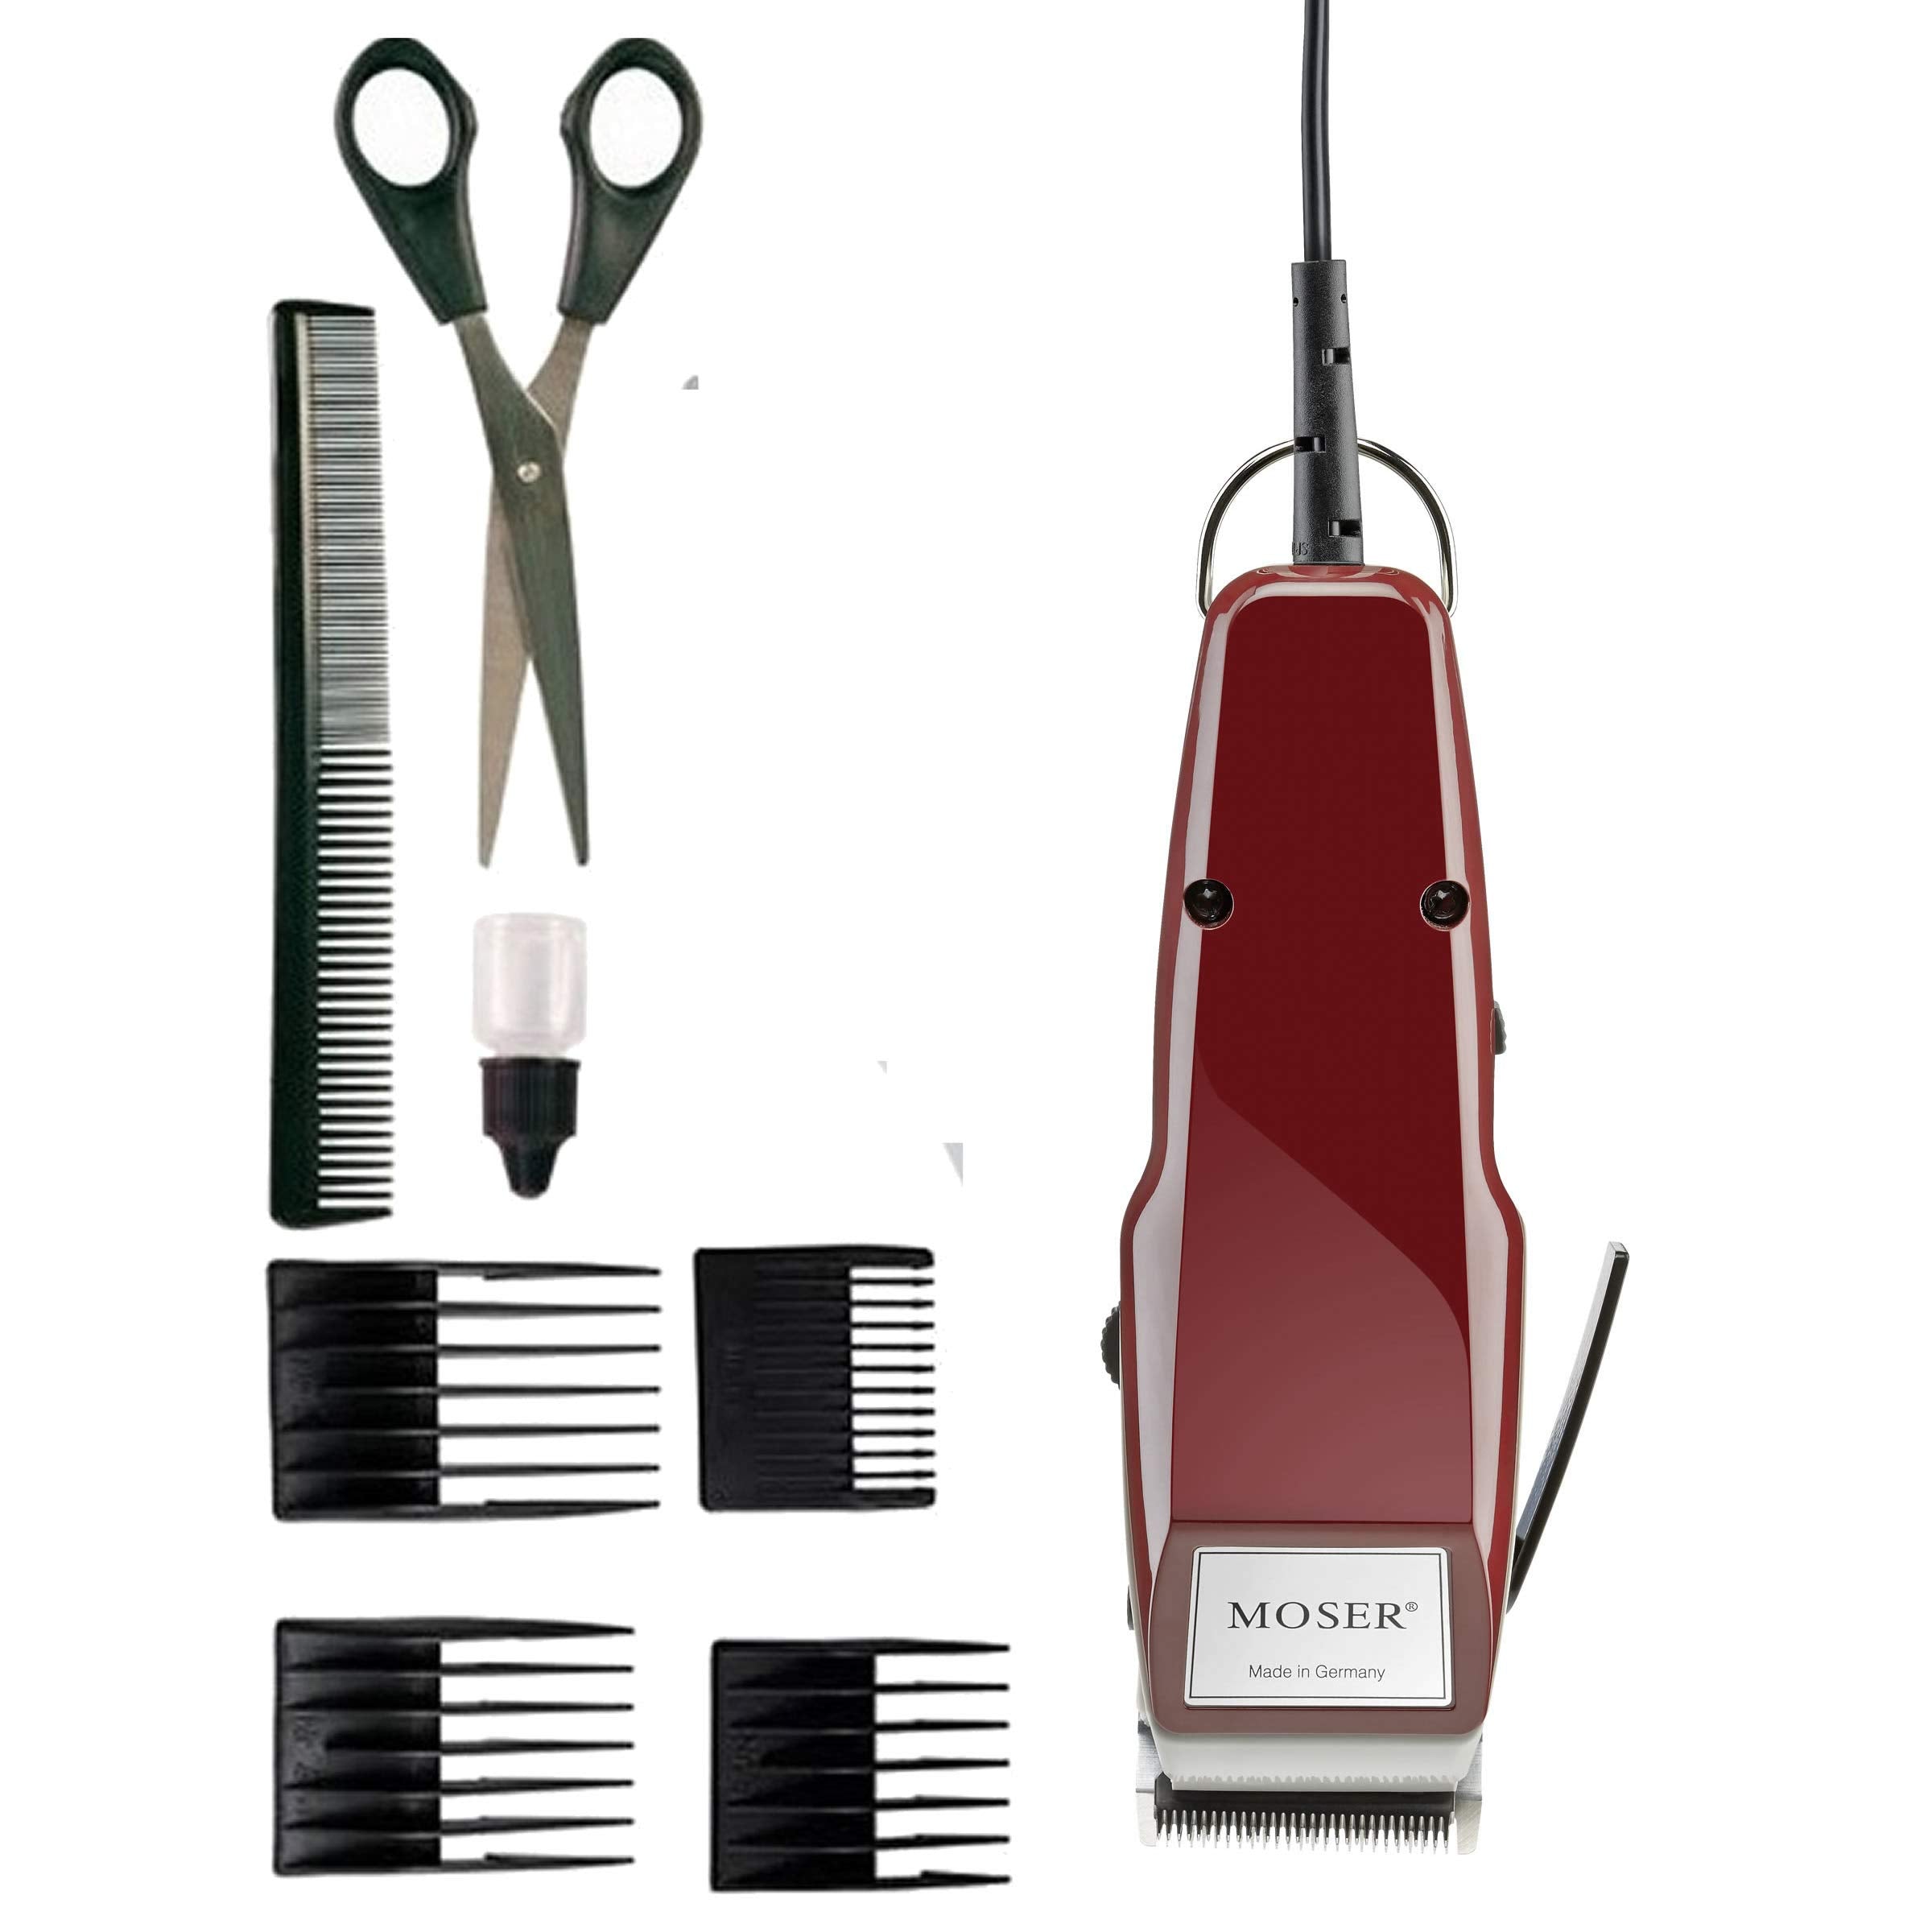 Moser 1400-0378, Professional Corded Hair Clipper, Burgandy Set (Pack Of 1)